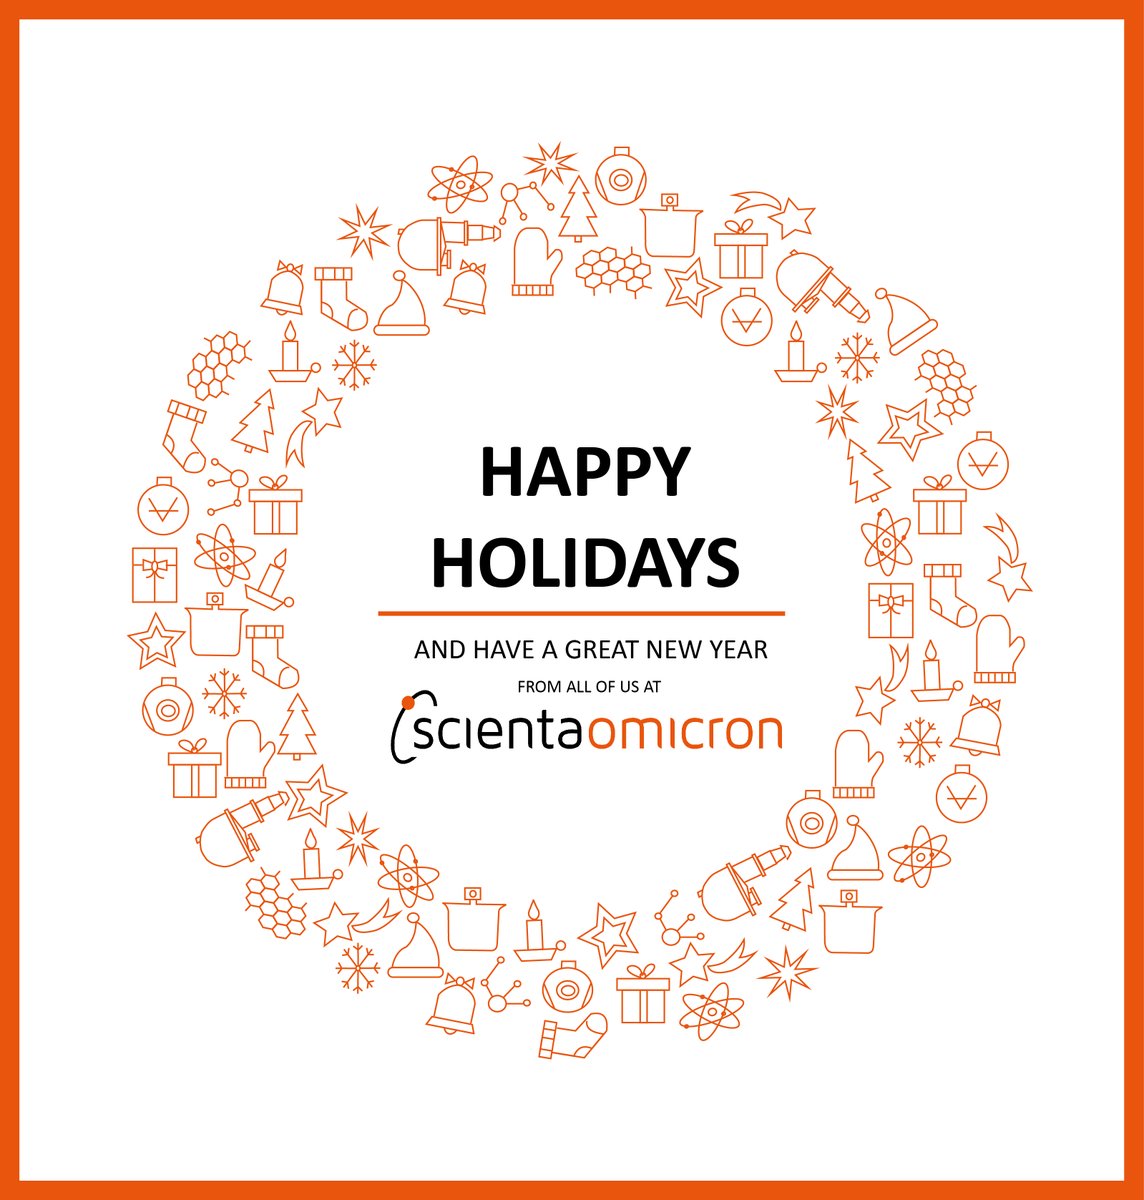 Wishing the global scientific community a joyful holiday season from all of us at Scienta Omicron!🌟 May your holidays be filled with rest, joy, and warmth. Cheers to continued collaboration and scientific excellence in the new year! 🥂 #HappyHolidays #ScienceCheers